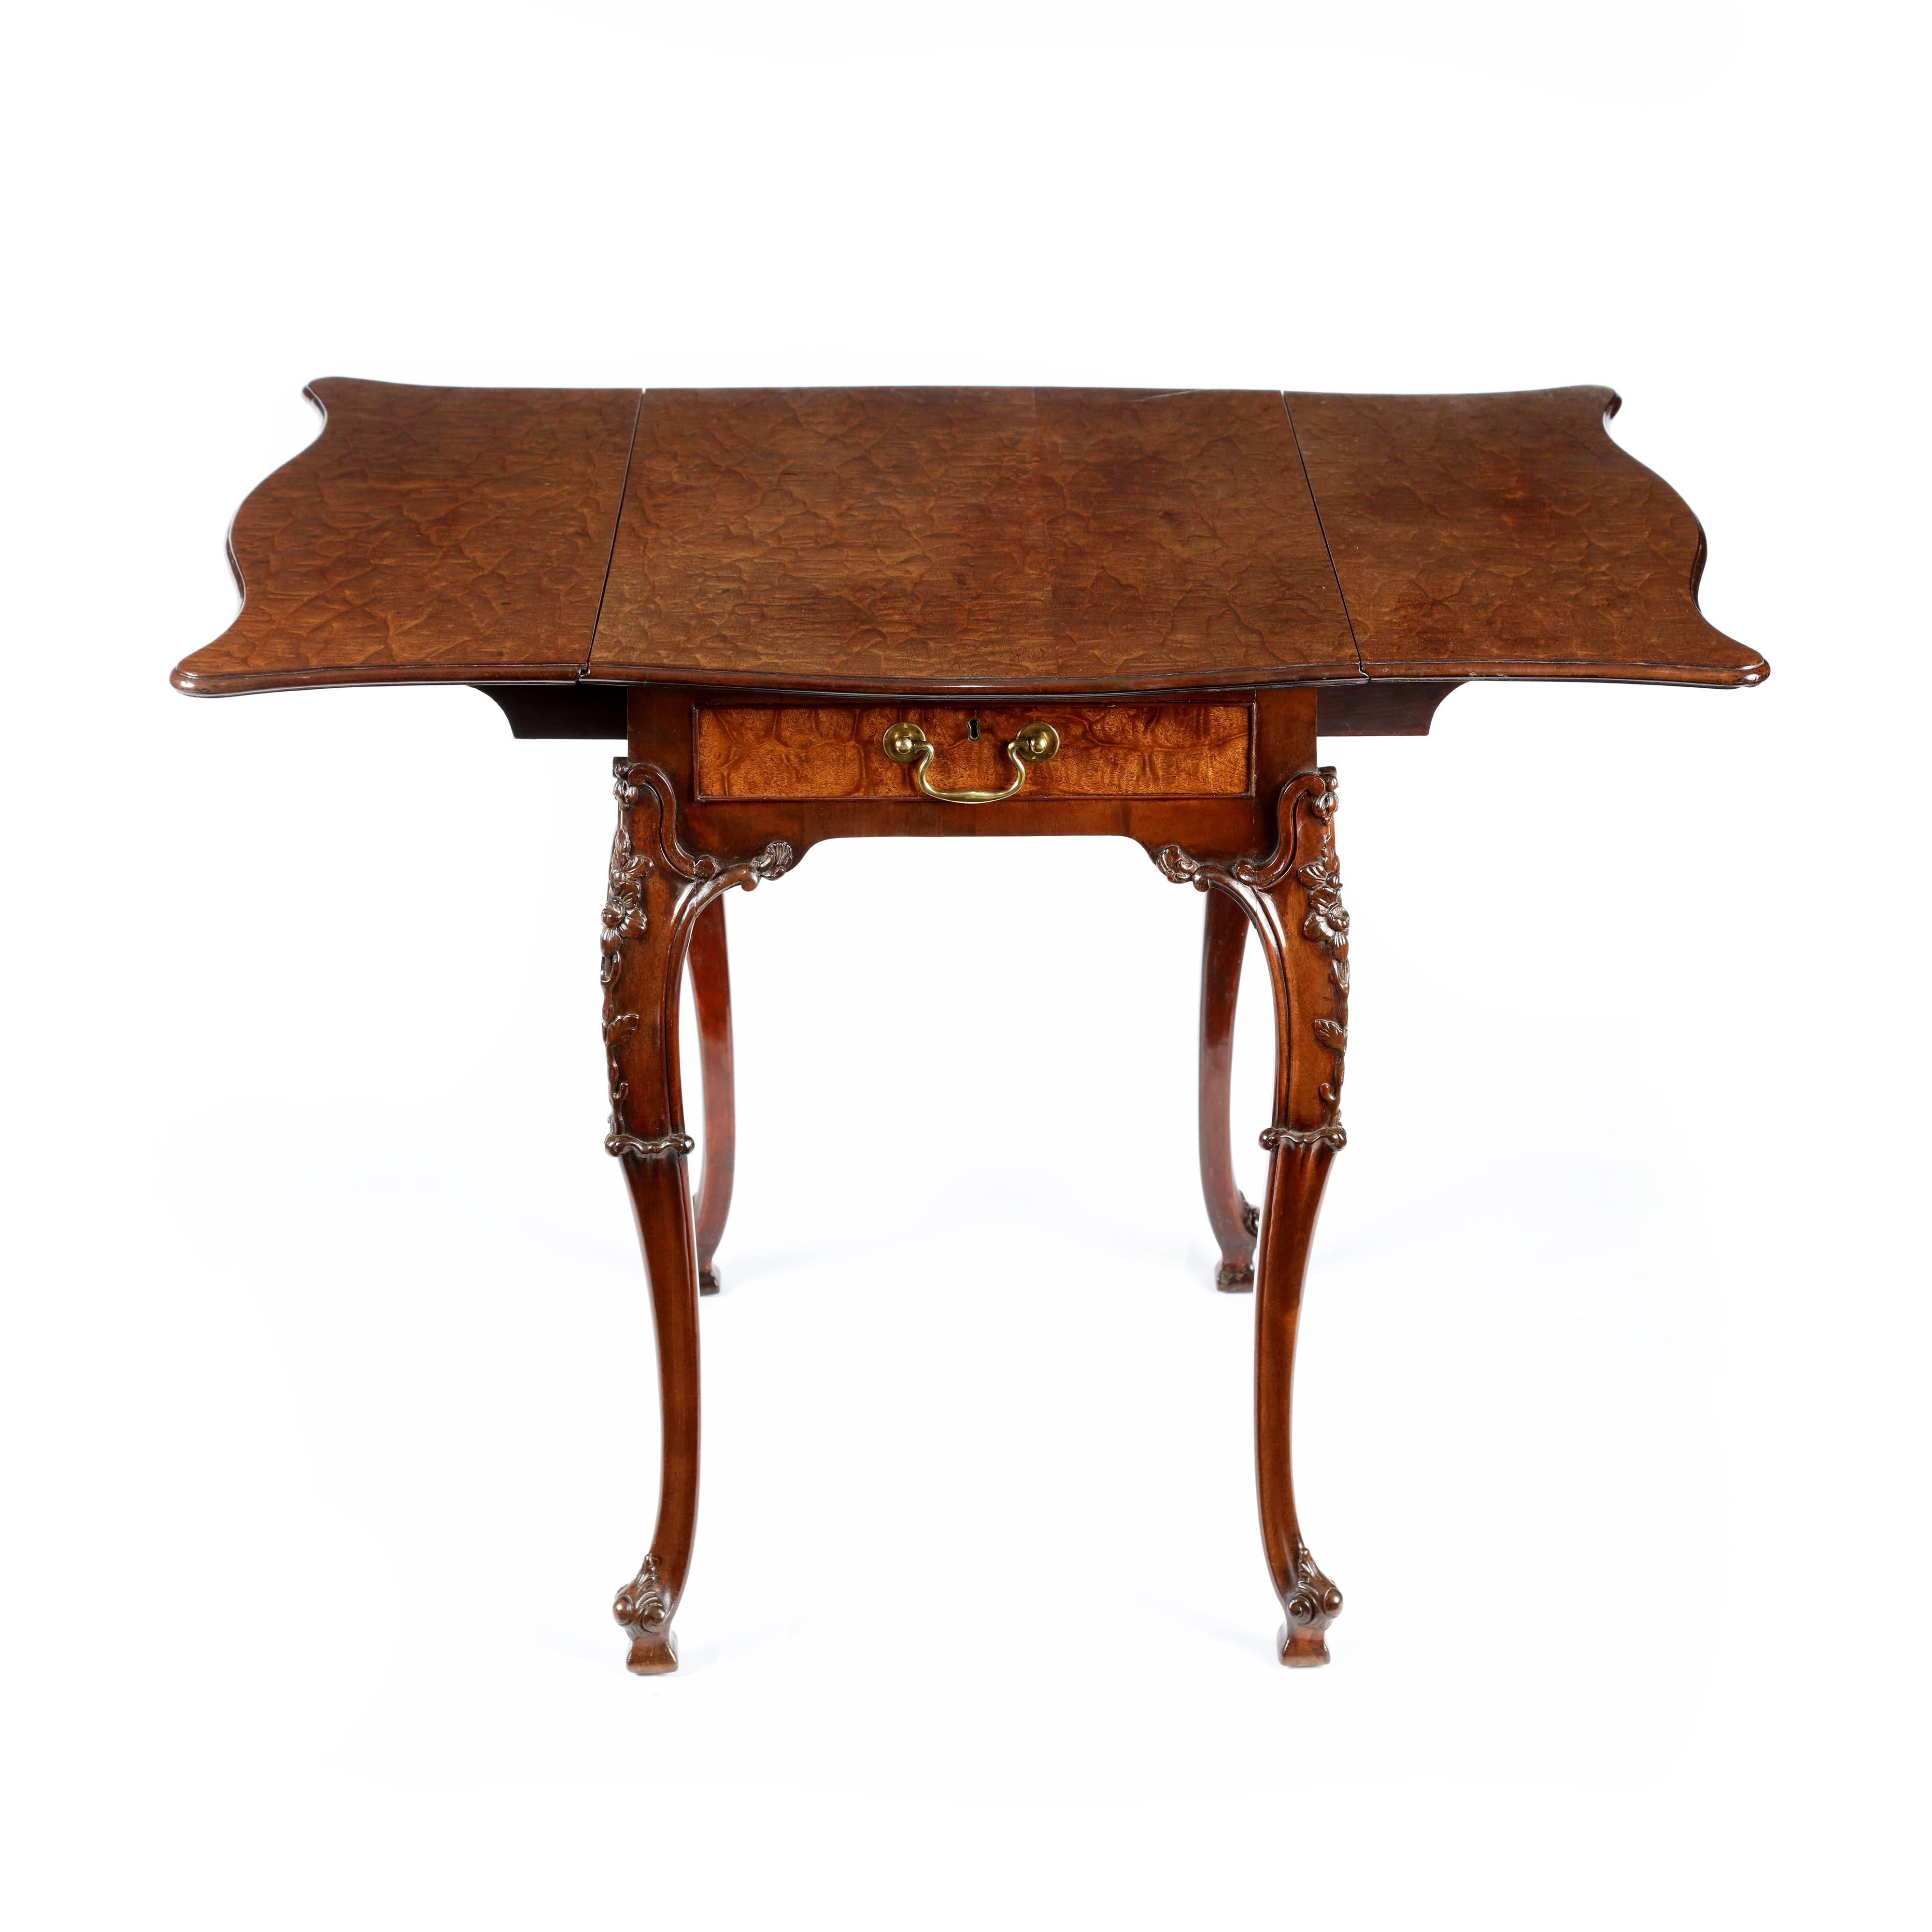 Description: A rare George III “crocodile” and carved mahogany butterfly top pembroke table, attributed to Thomas Chippendale. The wonderfully figured “crocodile” or “fustic” mahogany top of serpentine shape to all for sides forming a “butterfly”